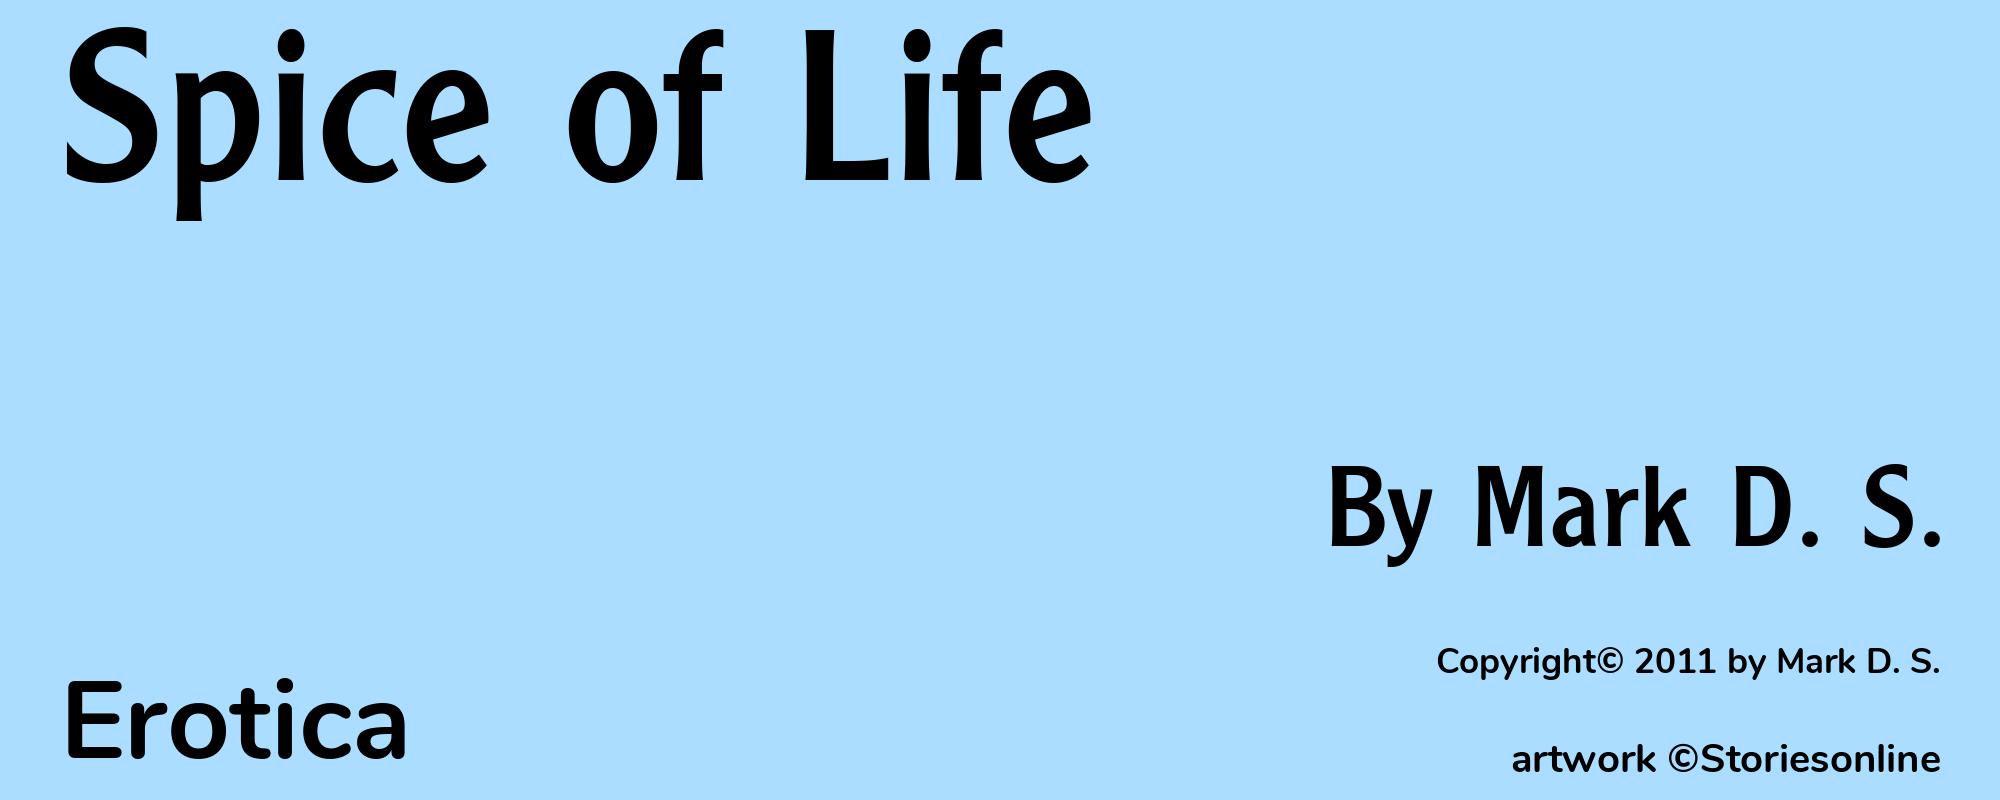 Spice of Life - Cover